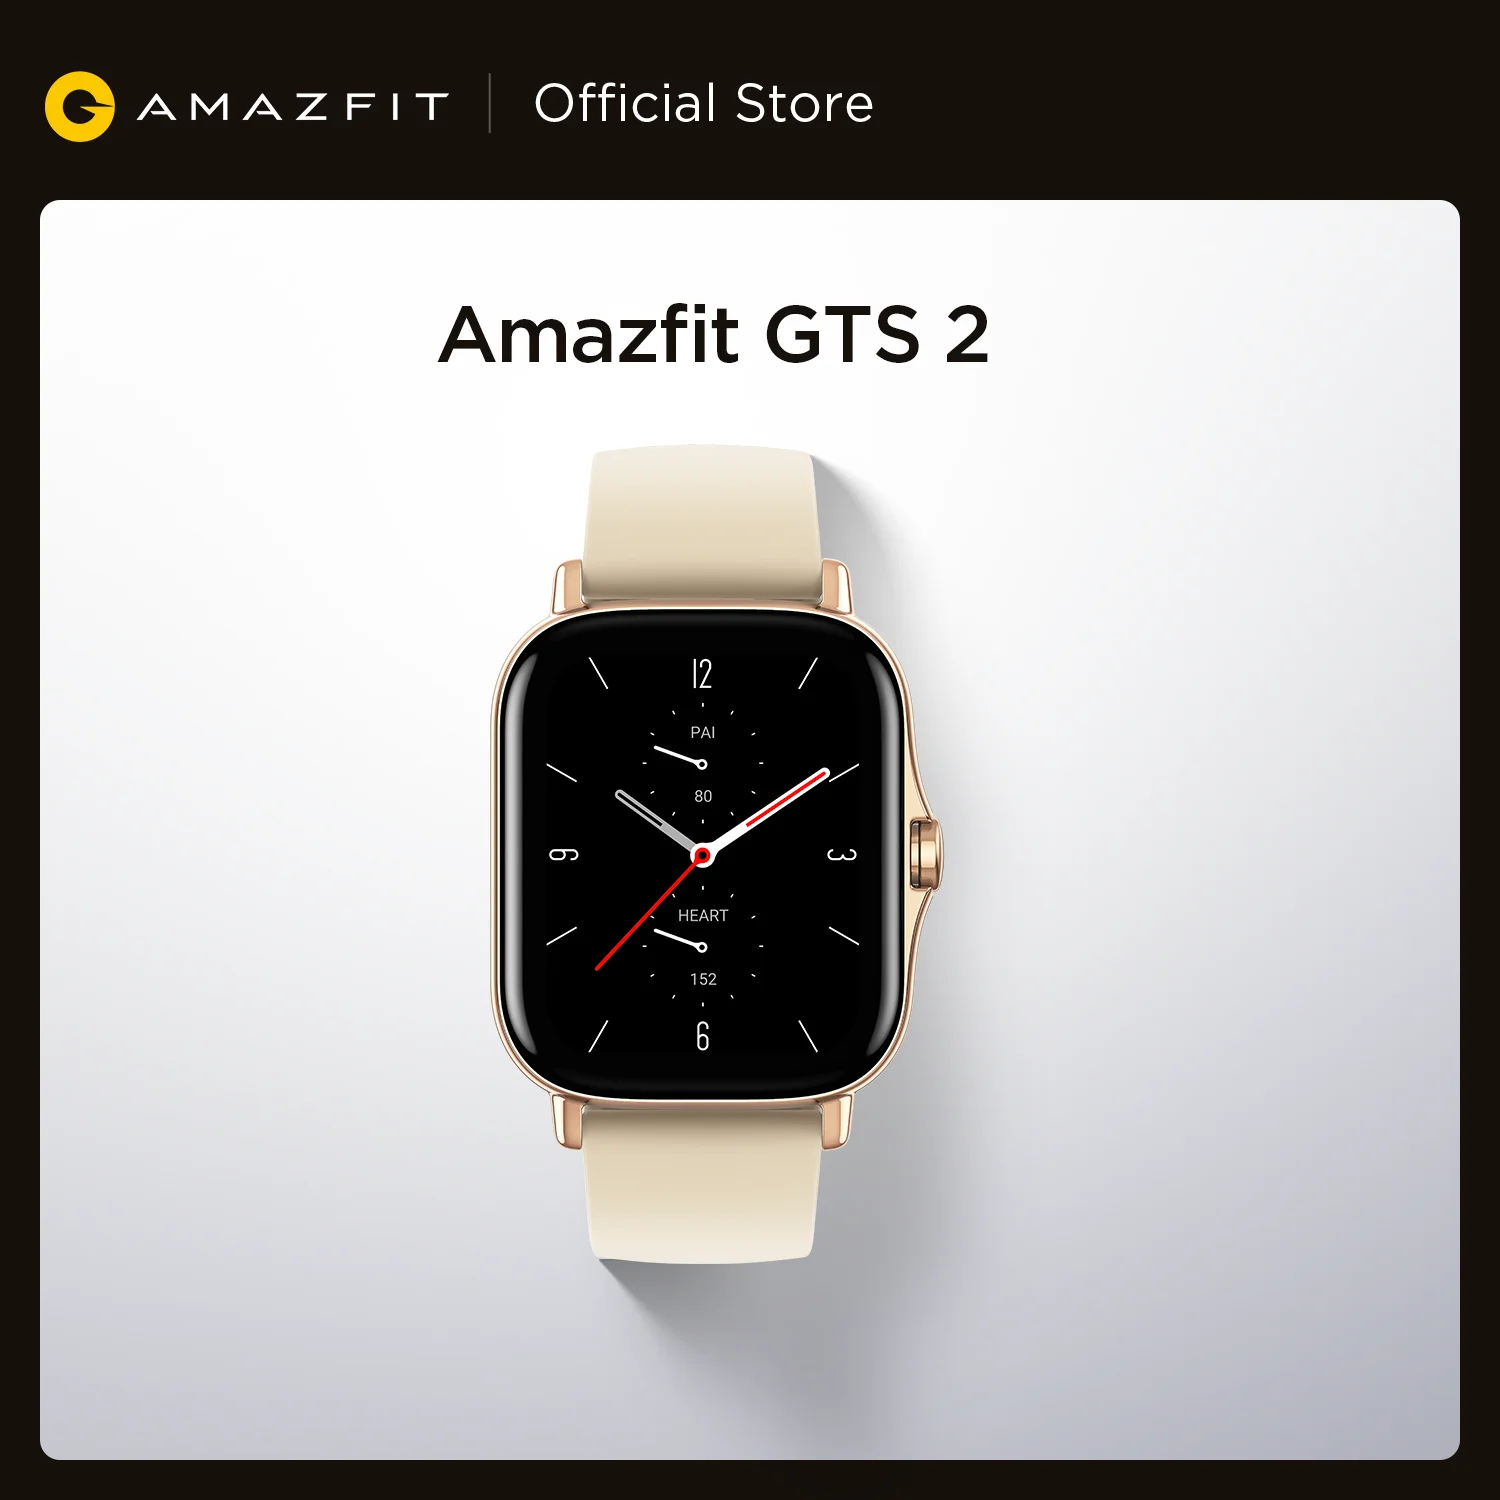 Cheap Original Amazfit GTS 2 Smartwatch 12 Sport Modes 5ATM Water Resistant AMOLED Display All Day Heart Rate Tracking Smart Watch